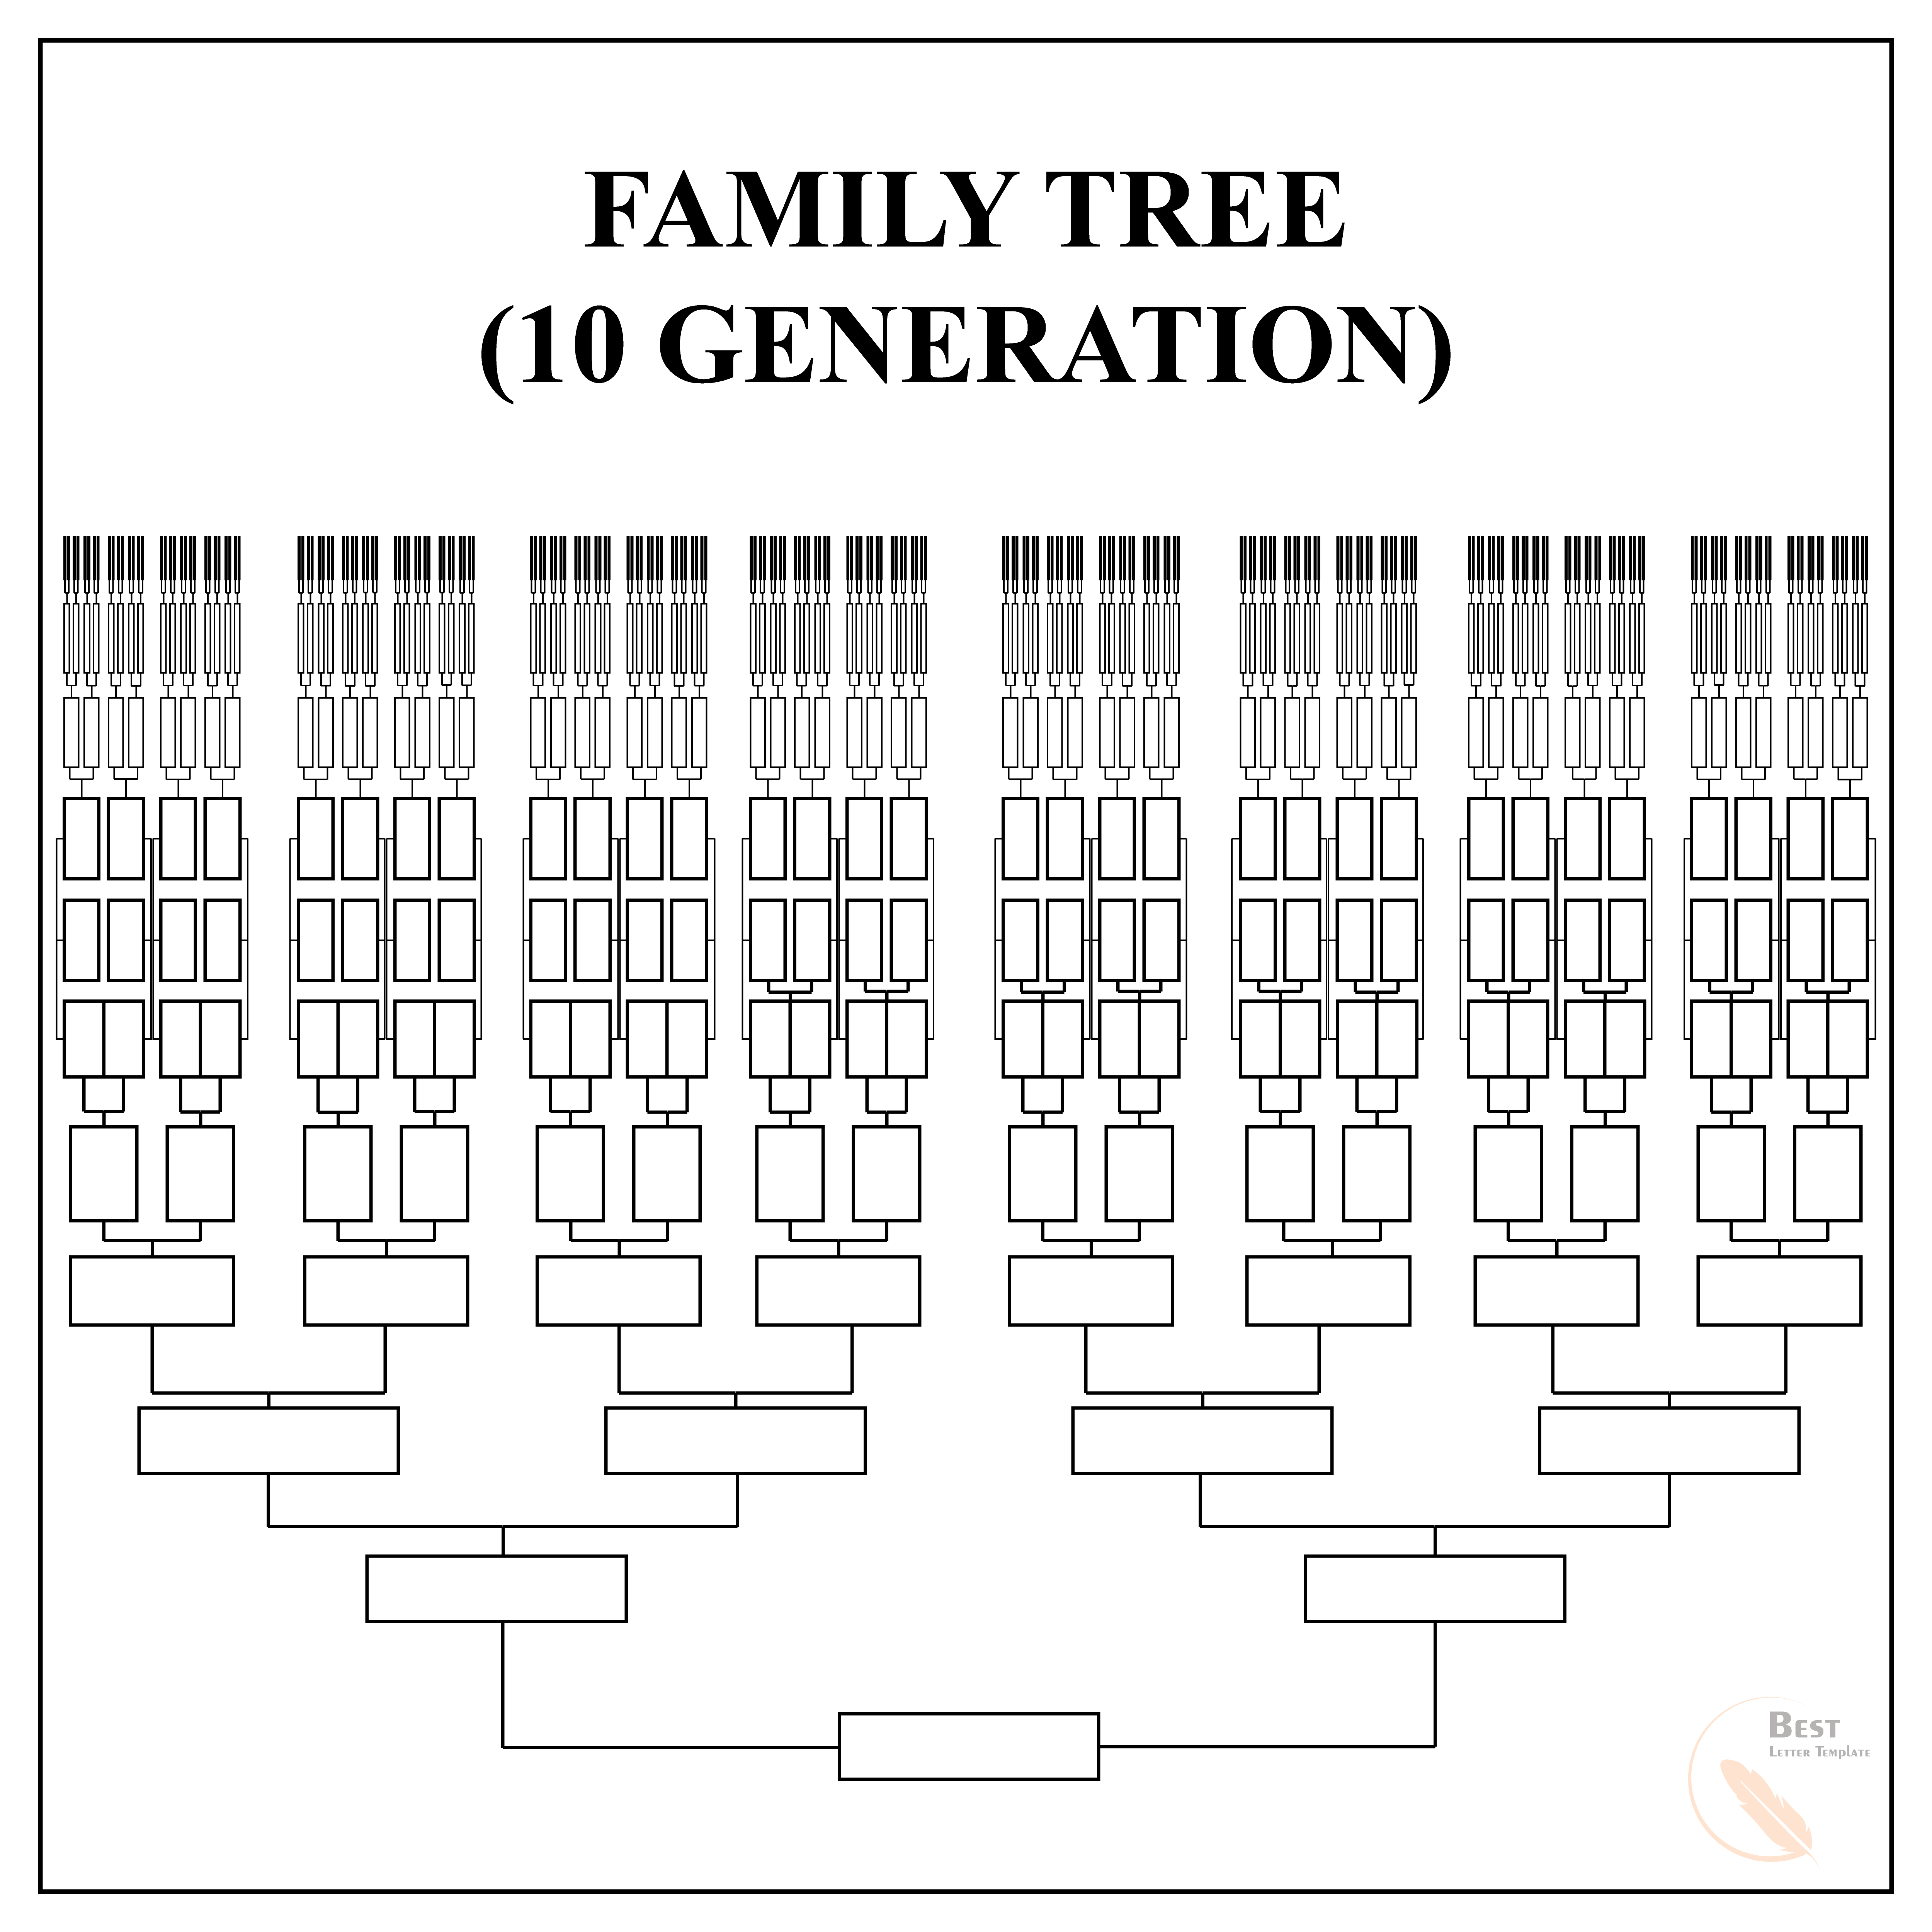 10-generation-family-tree-template-excel